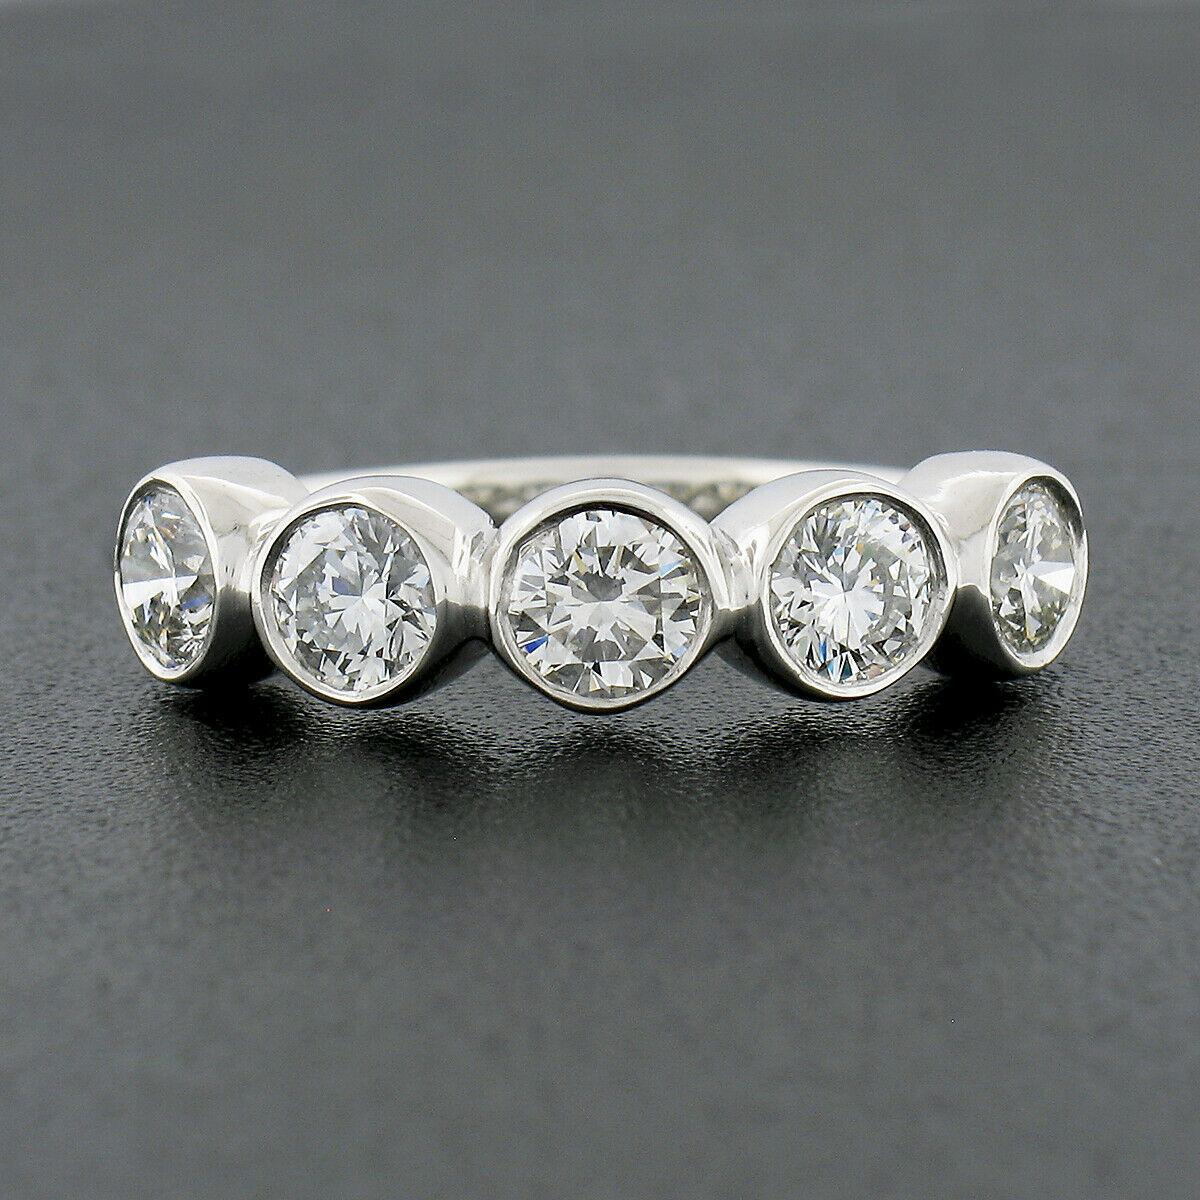 This magnificent diamond band ring was newly crafted from solid platinum and features 5 round brilliant cut diamonds neatly bezel set across its top. Each of these fiery diamond shows a very nice large size, totaling exactly 1.36 carats in weight,